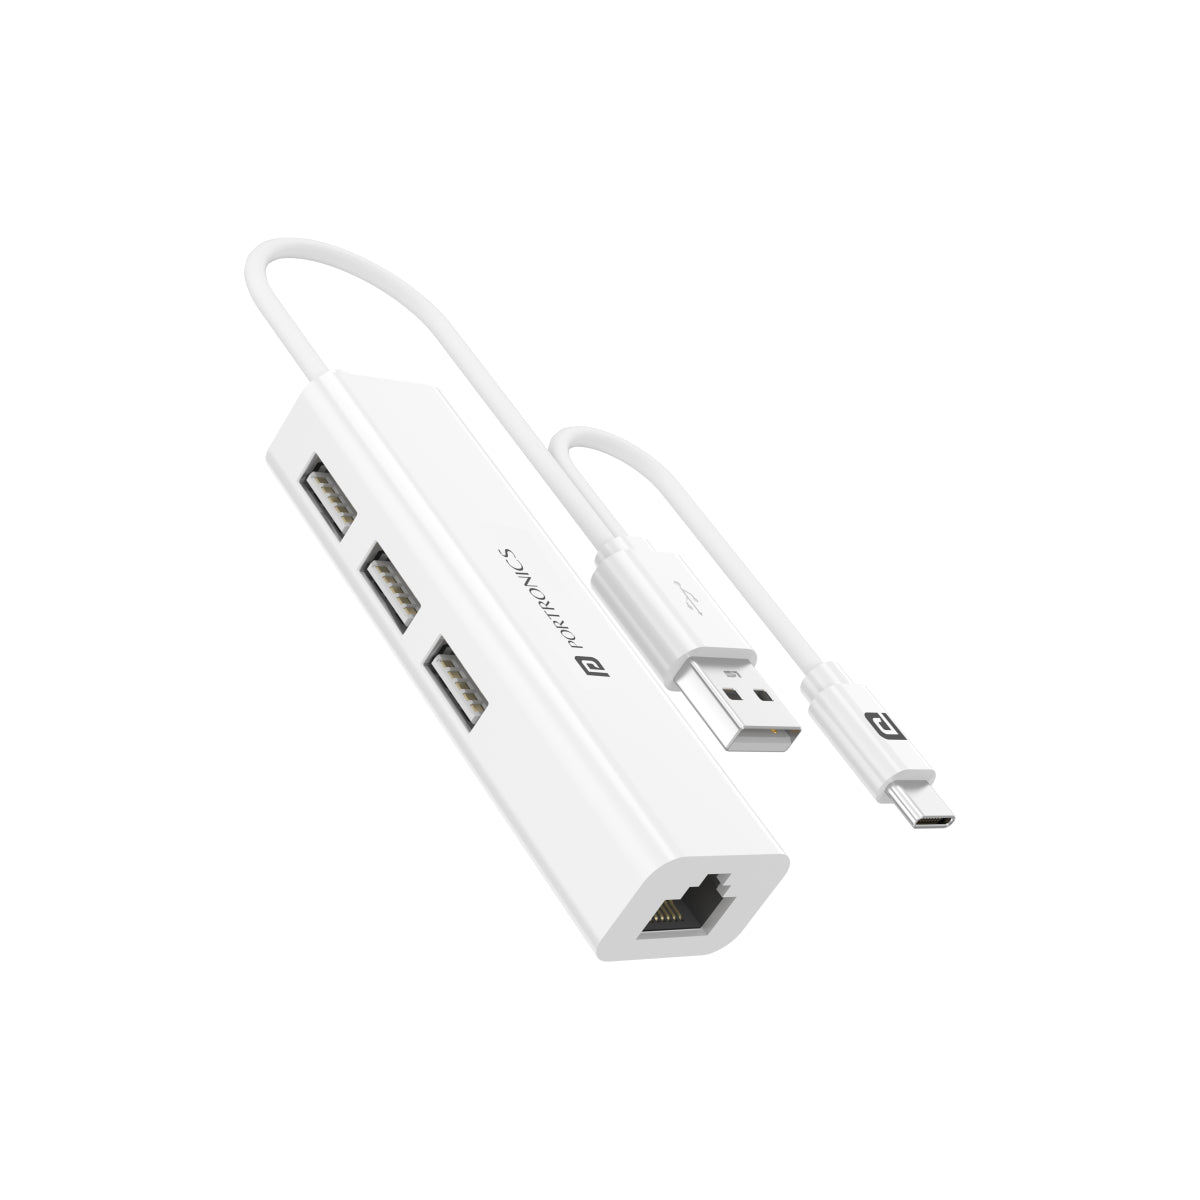 PORTRONICS-Multiport Adapter For USB-C Devices